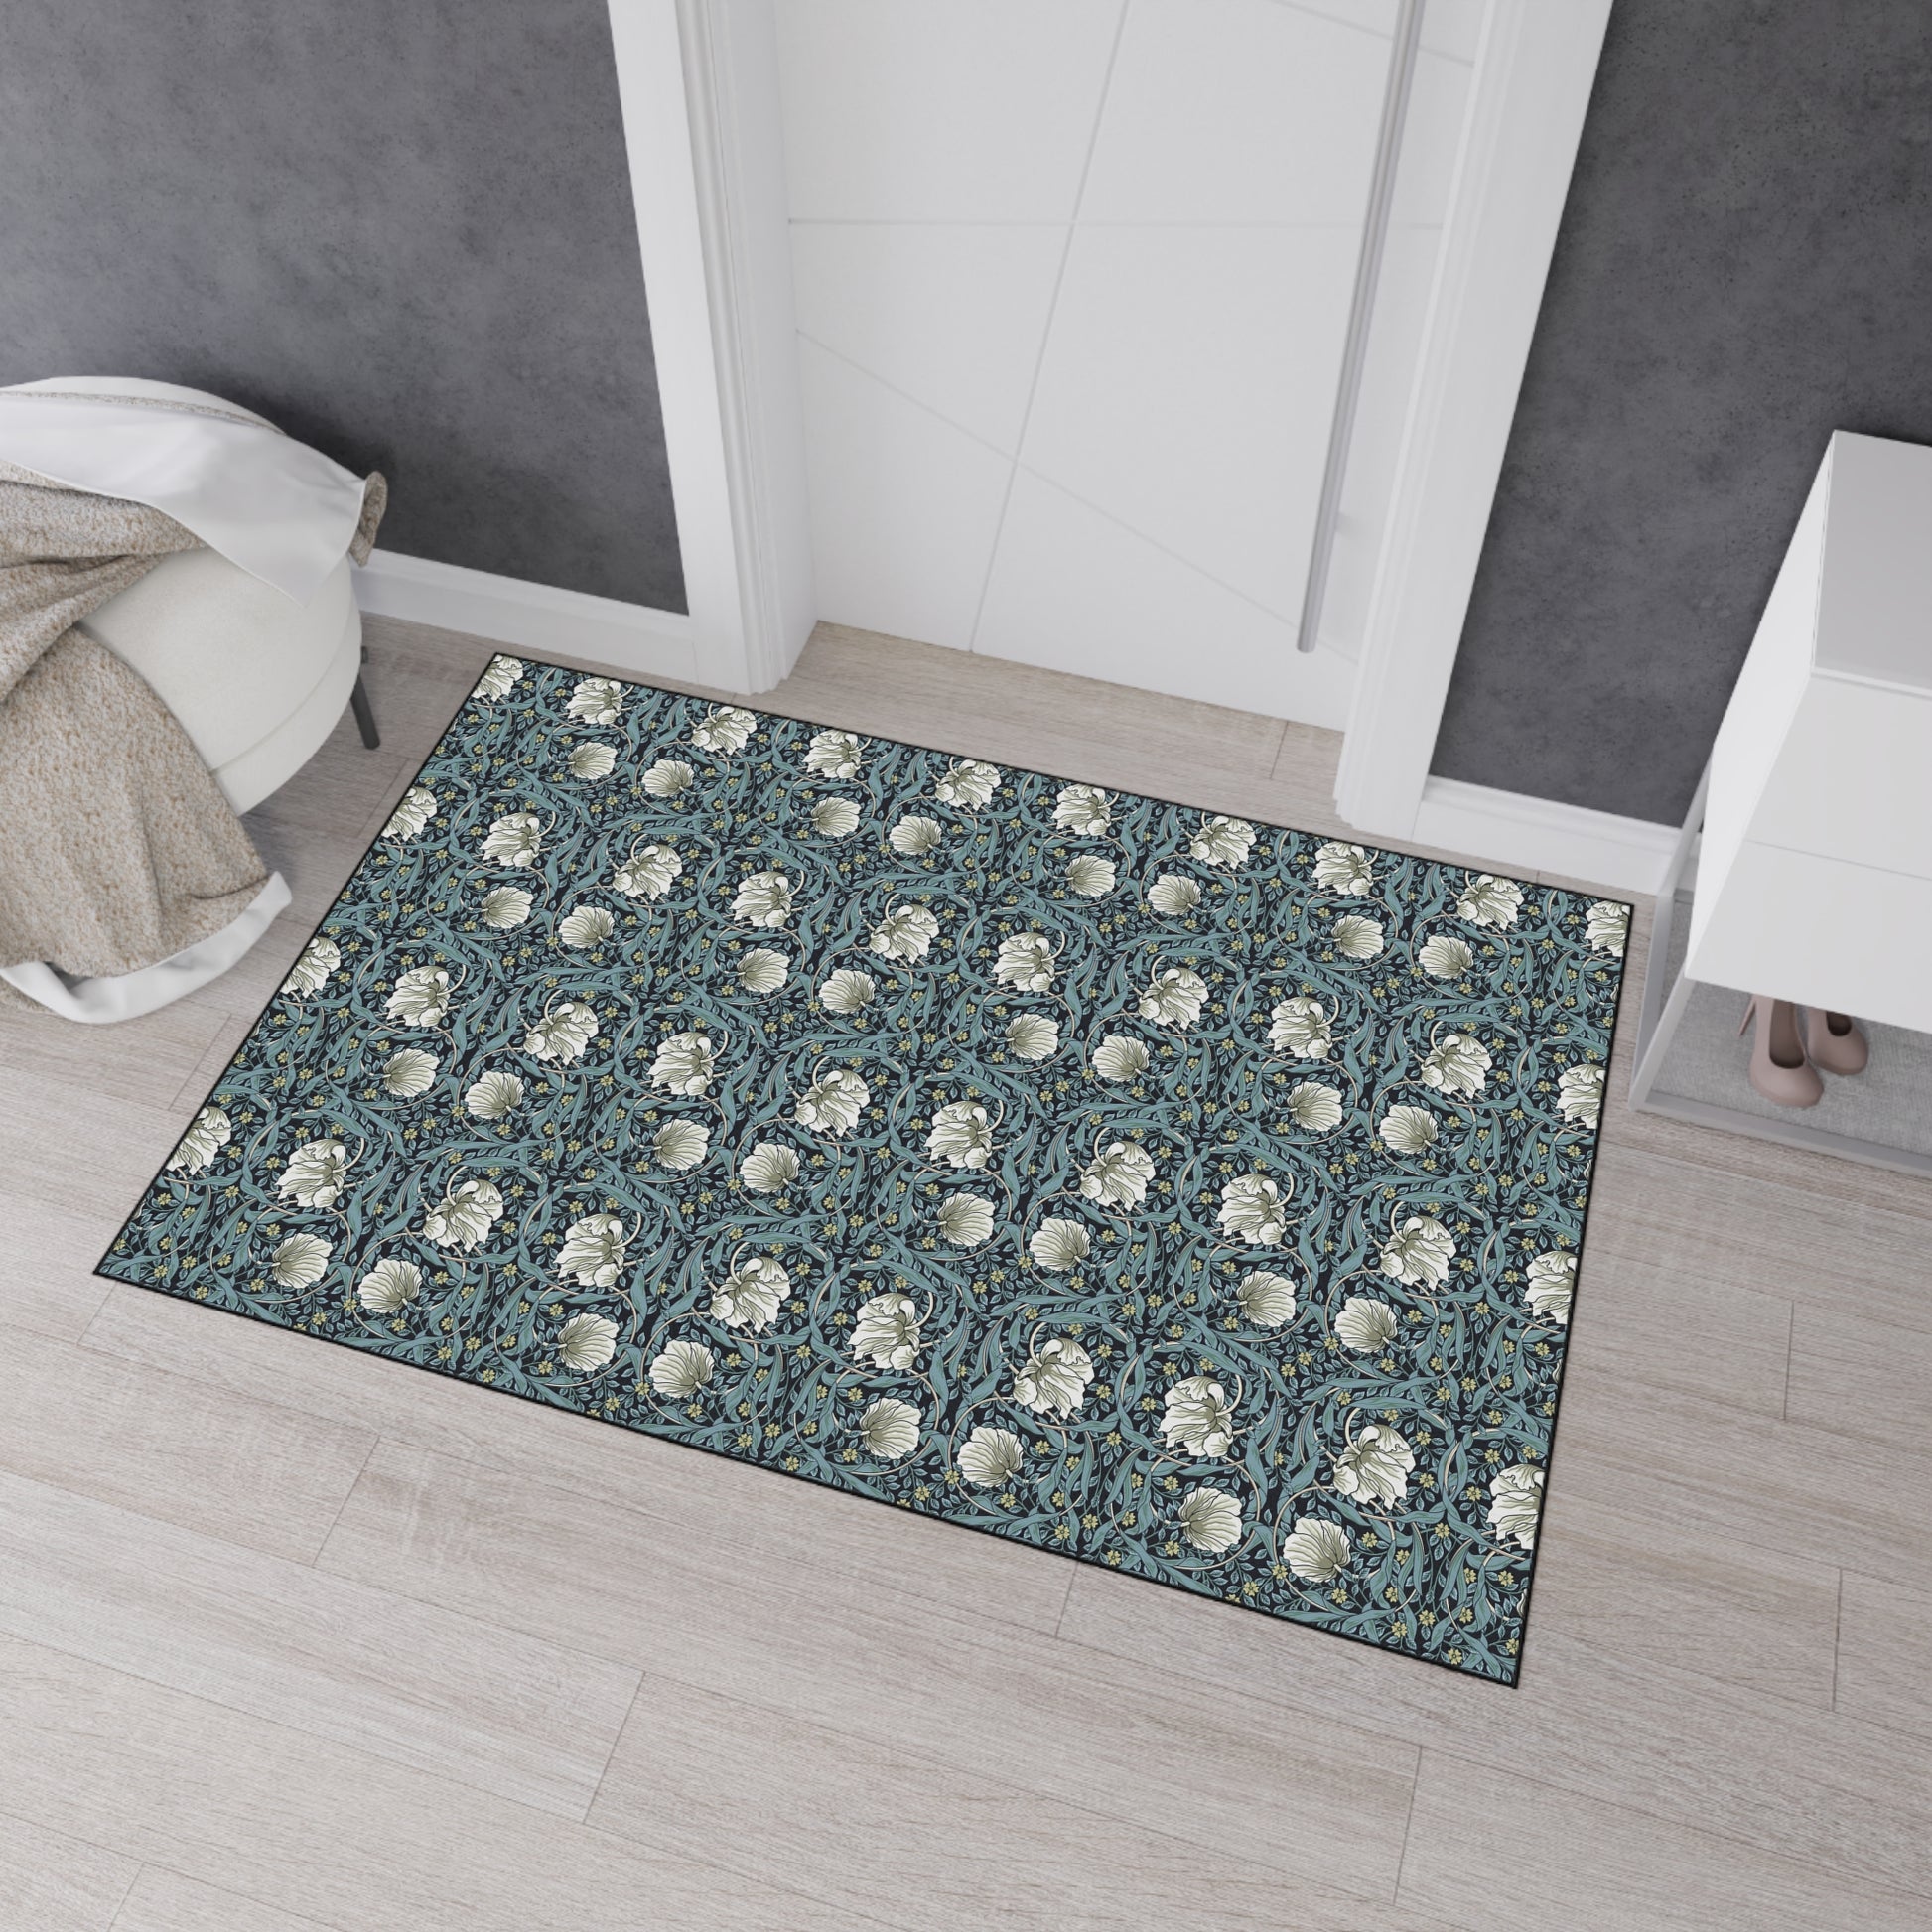 william-morris-co-heavy-duty-floor-mat-pimpernel-collection-slate-9